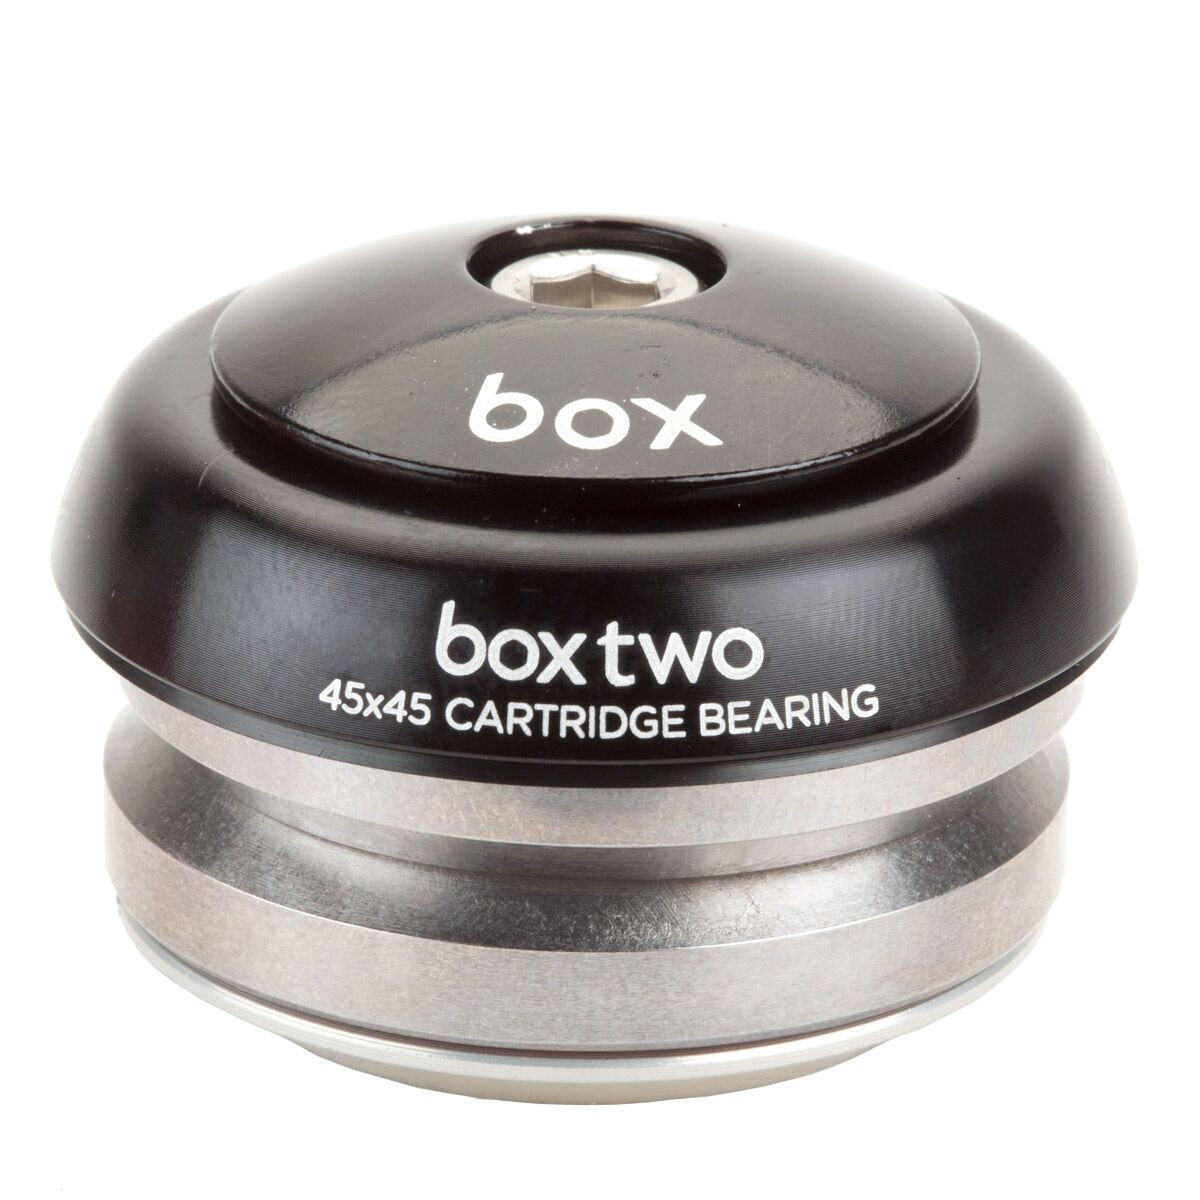 Box Two 45x45 1 1/8" Intregrated headset black